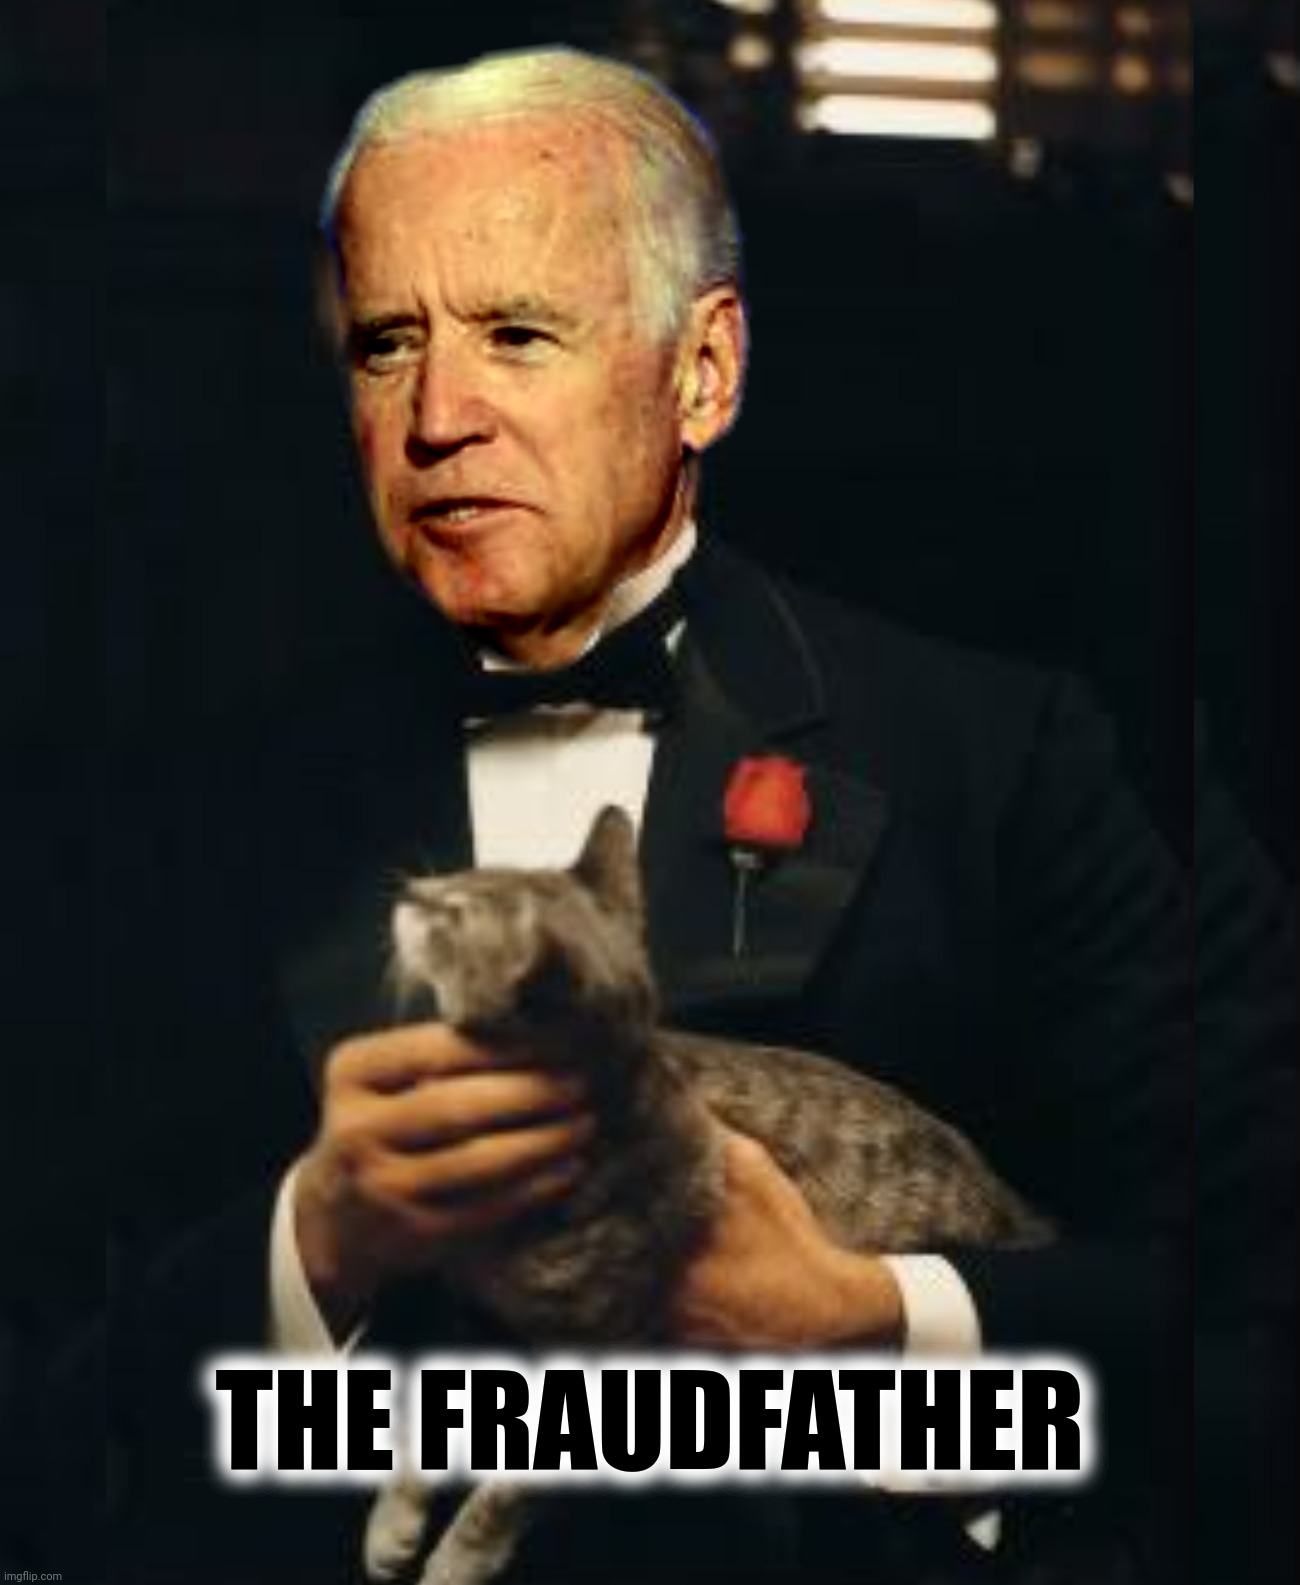 THE FRAUDFATHER | made w/ Imgflip meme maker